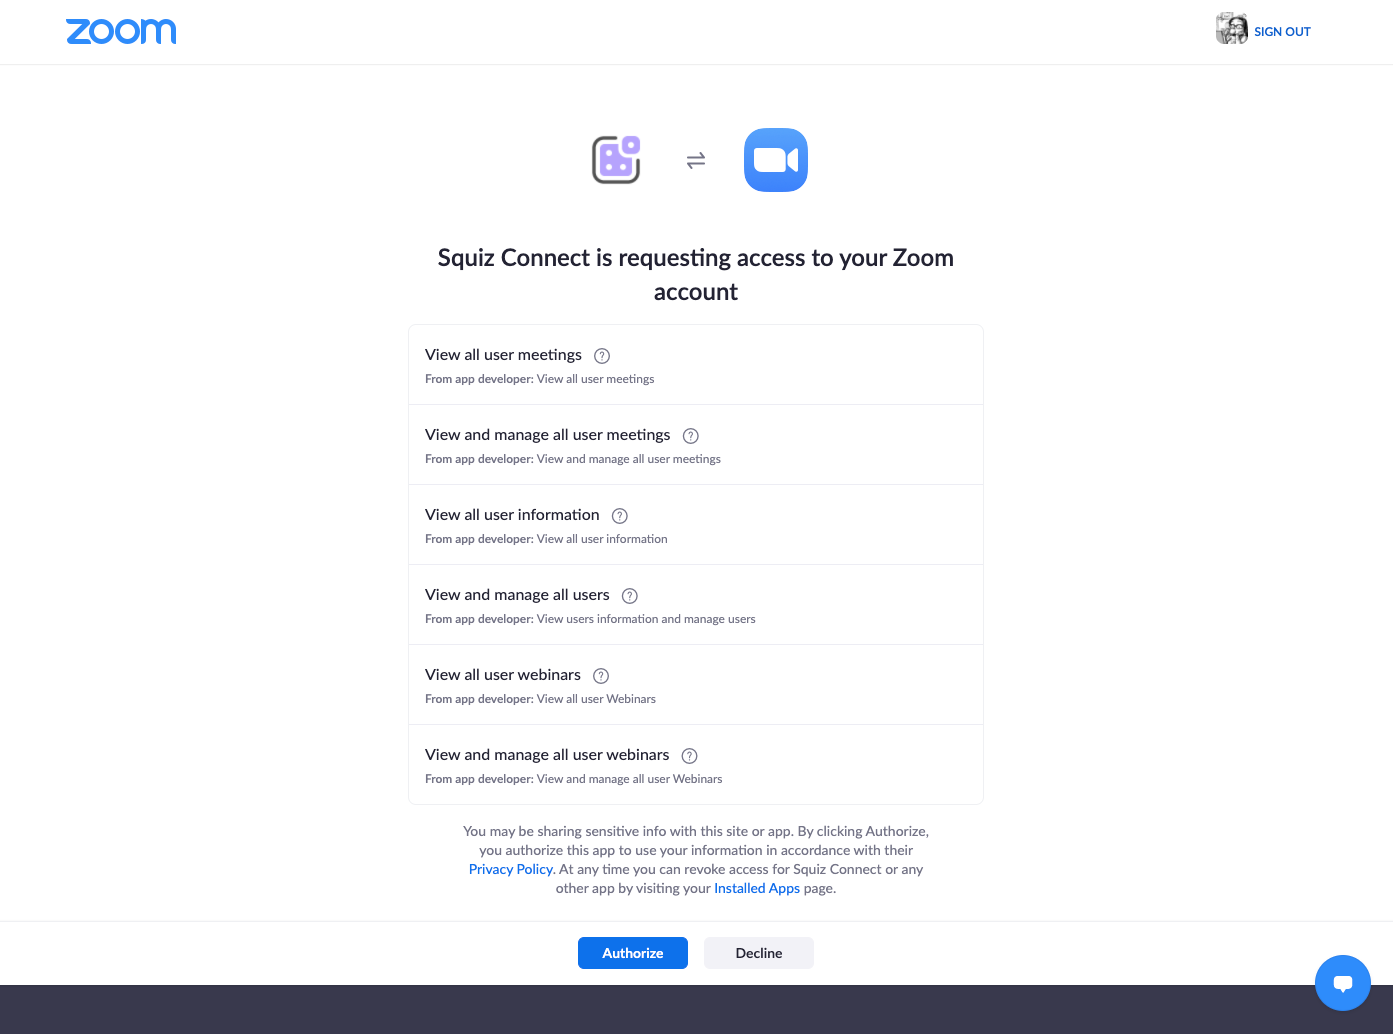 Zoom consent screen